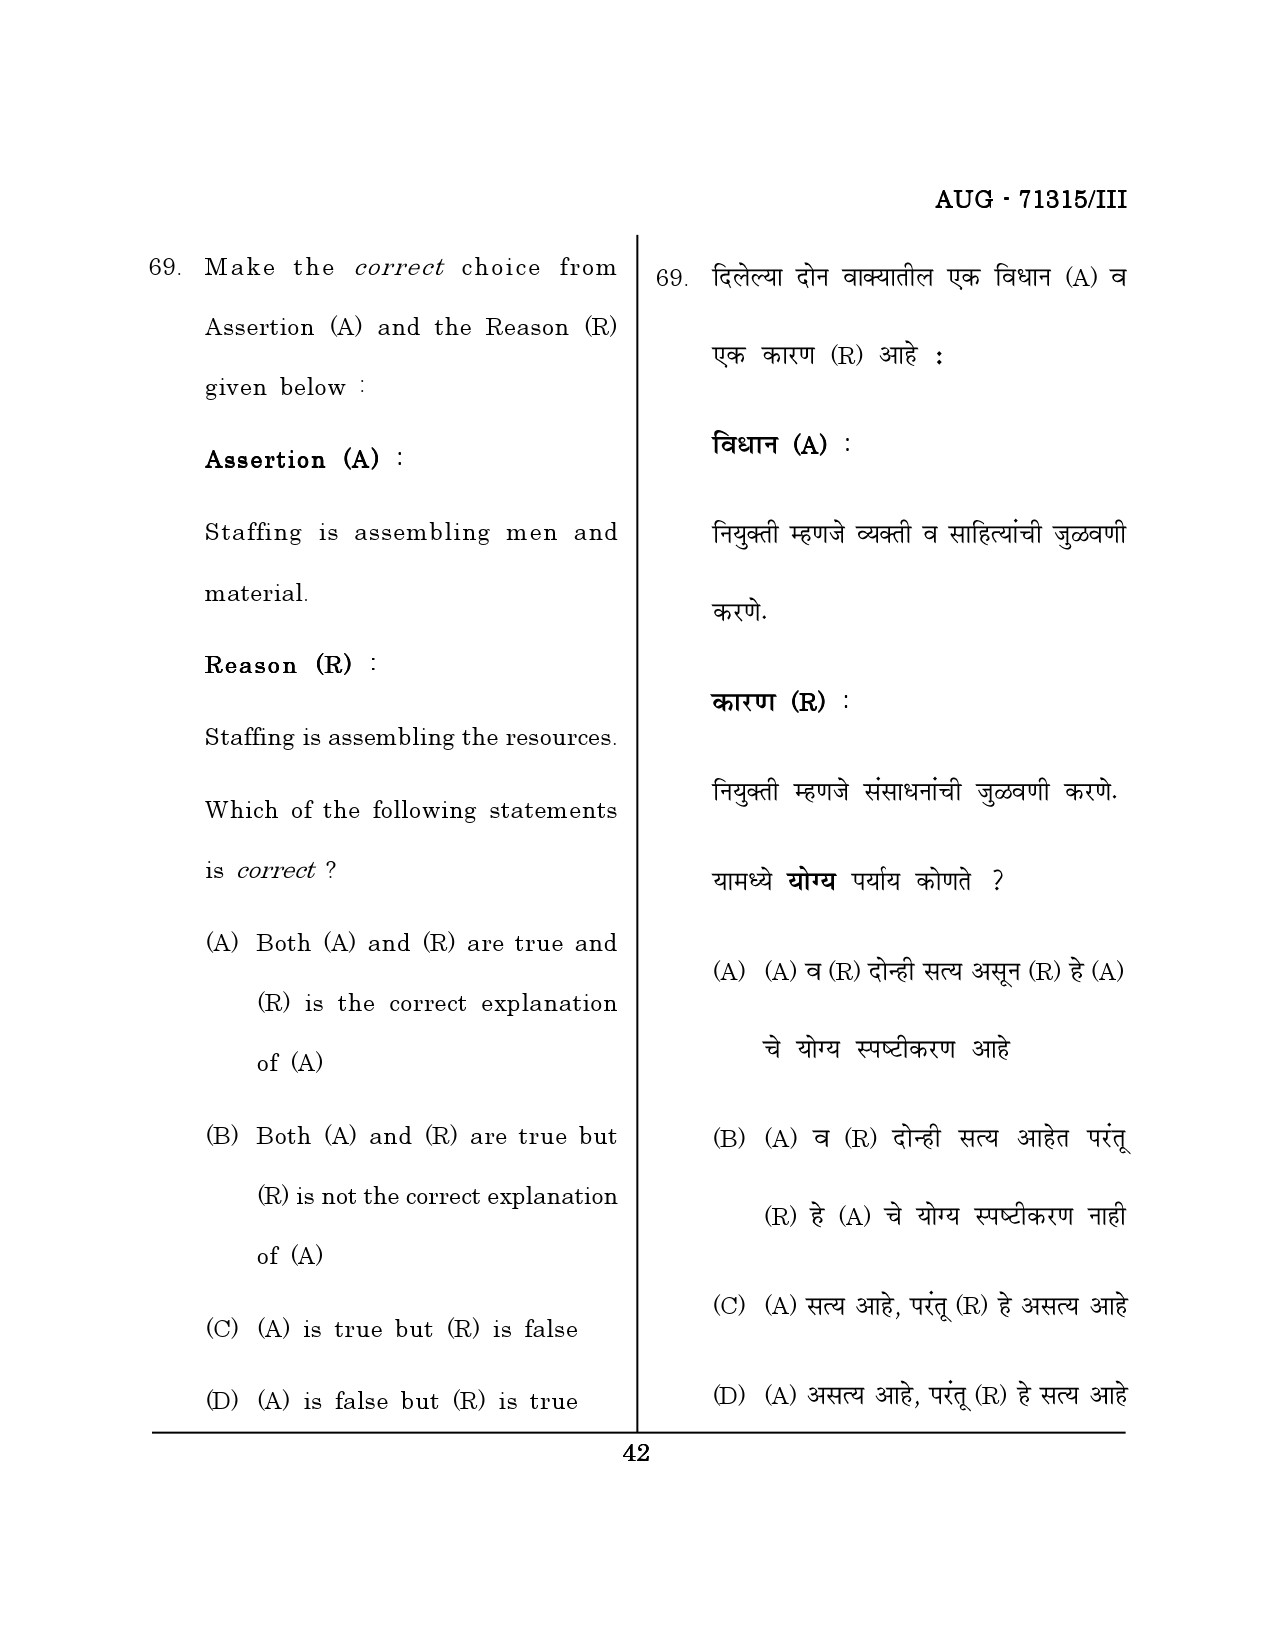 Maharashtra SET Physical Education Question Paper III August 2015 41